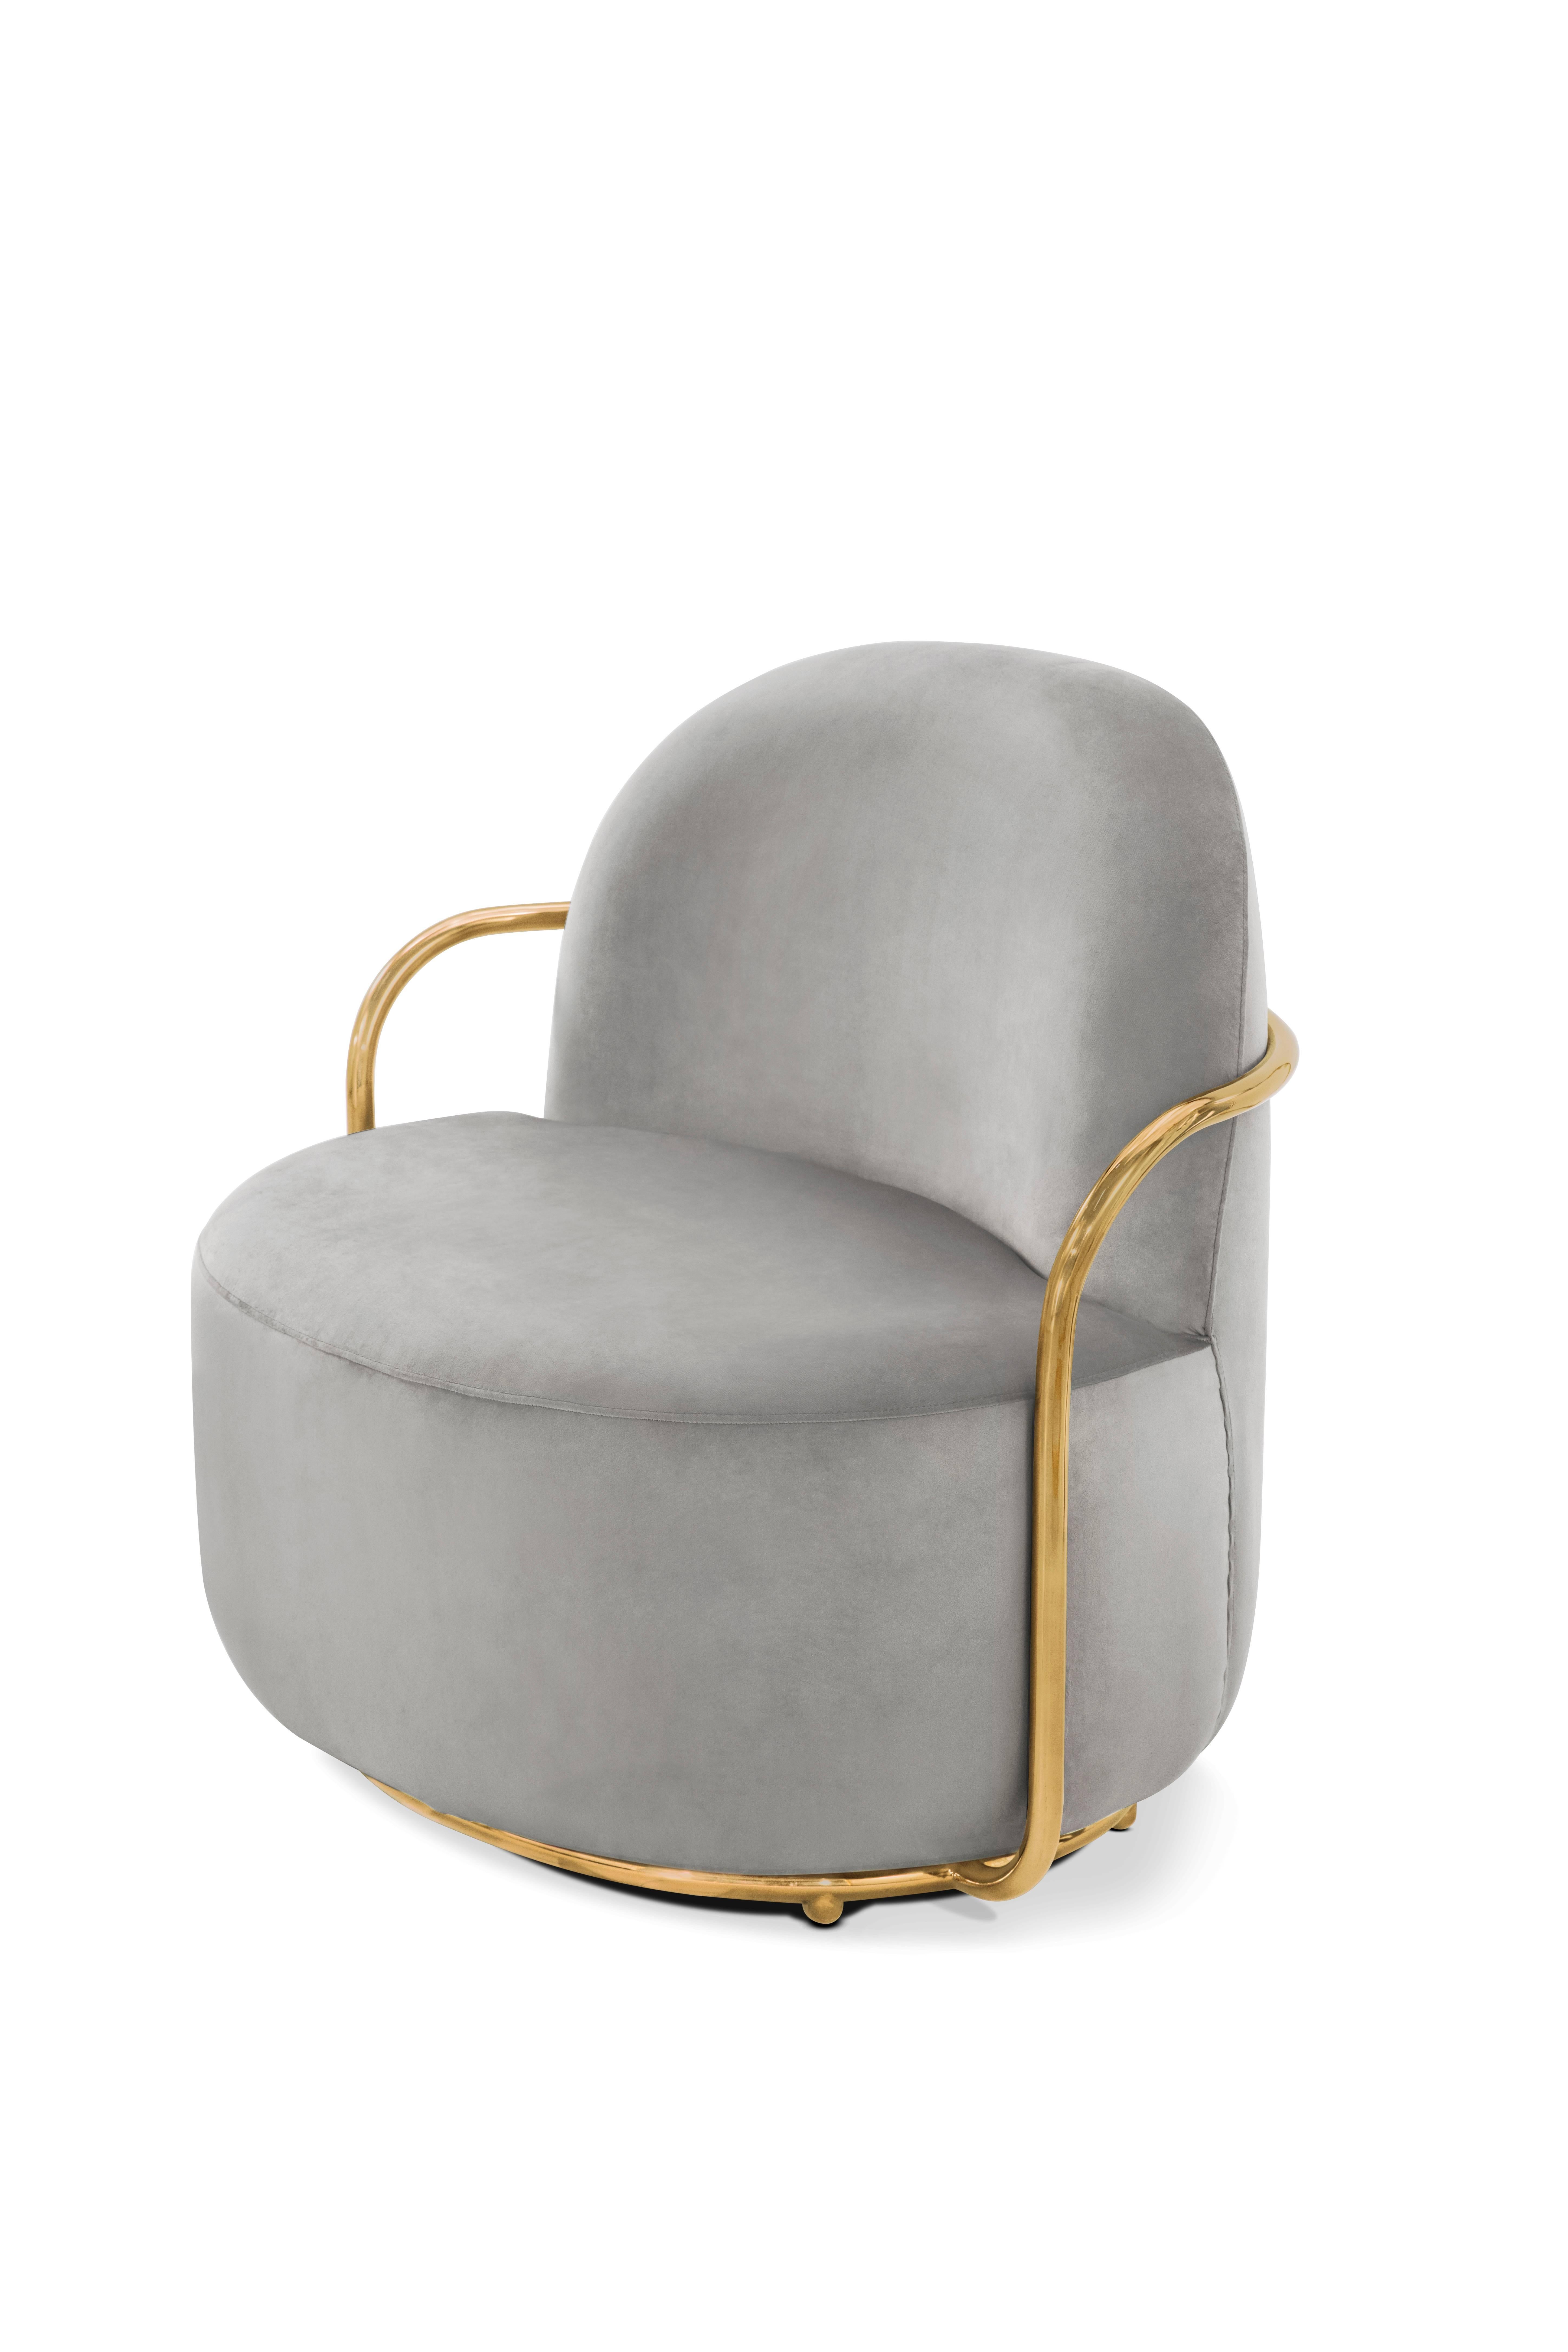 Orion lounge chair Grey by Nika Zupanc for Scarlet Splendour

The 88 constellations of the universe mysterious and magical, holding a promise to guide our destinies. Little wonder that they are the muse for the 88 Secrets, Nika Zupanc’s debut